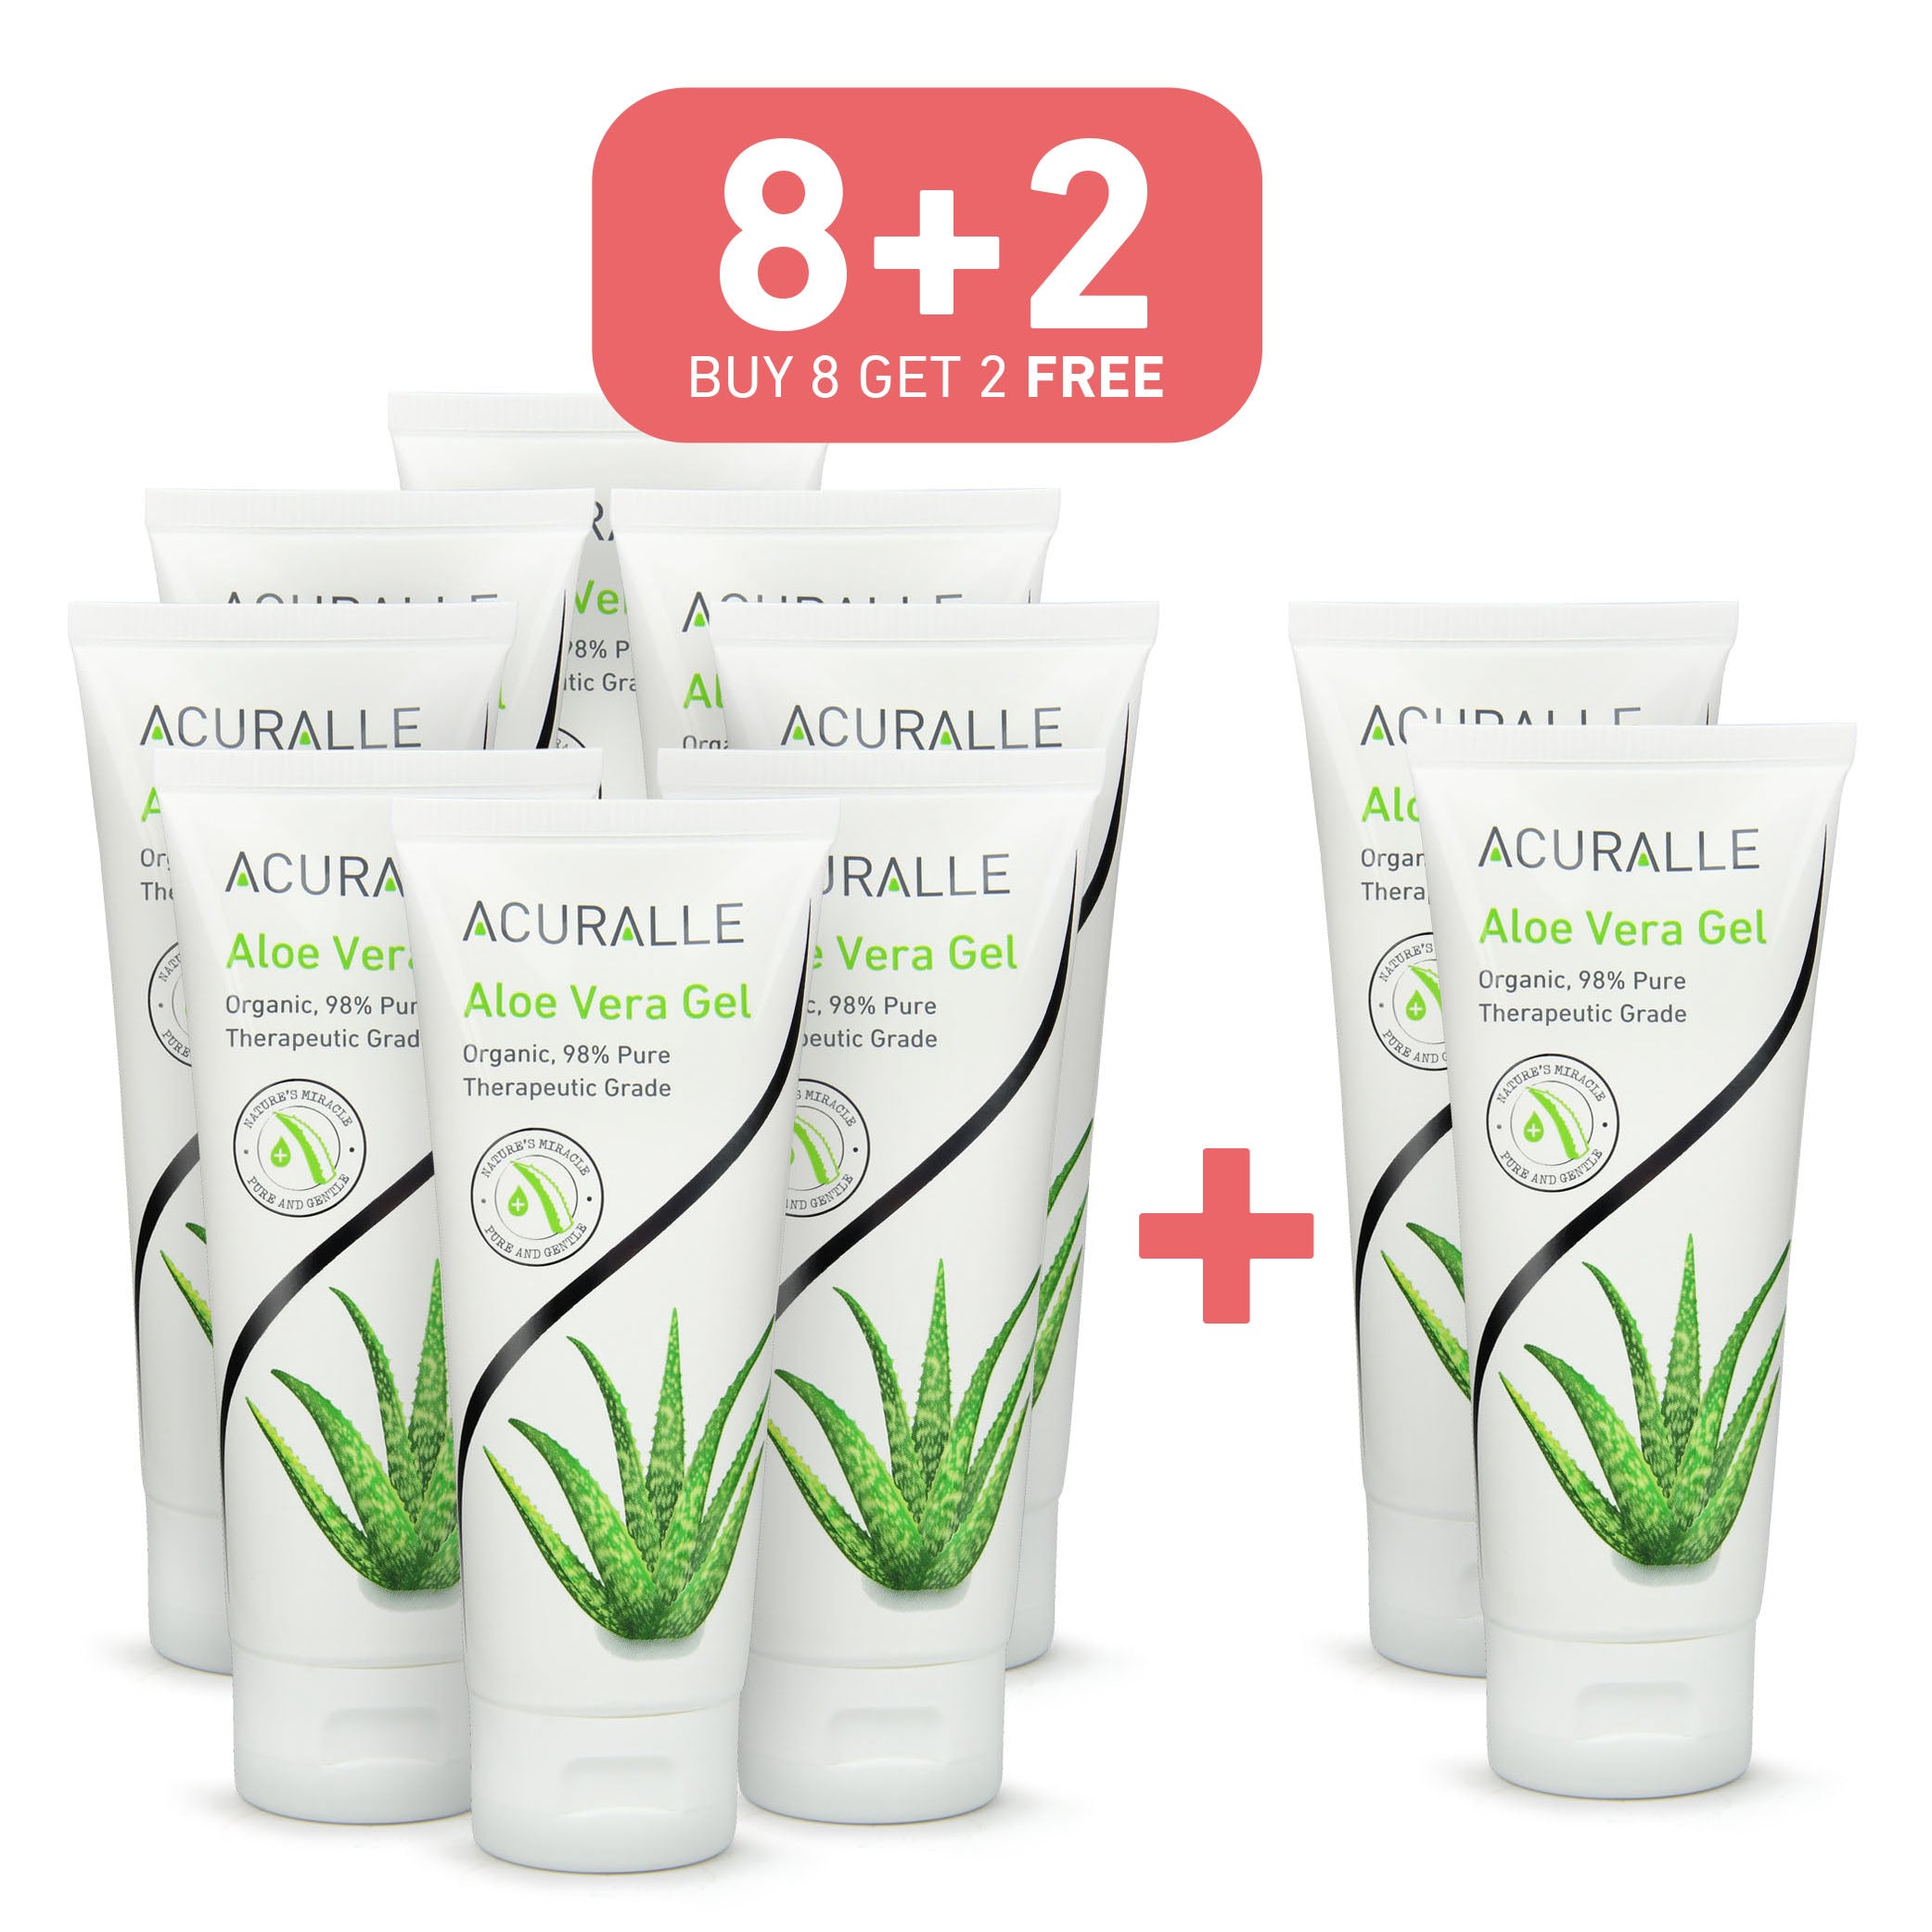 Acuralle Organic Pure Aloe Vera Gel 100ml For All Skin Type Oily Dry Normal, Best in Singapore, 8 Free 2 Sale